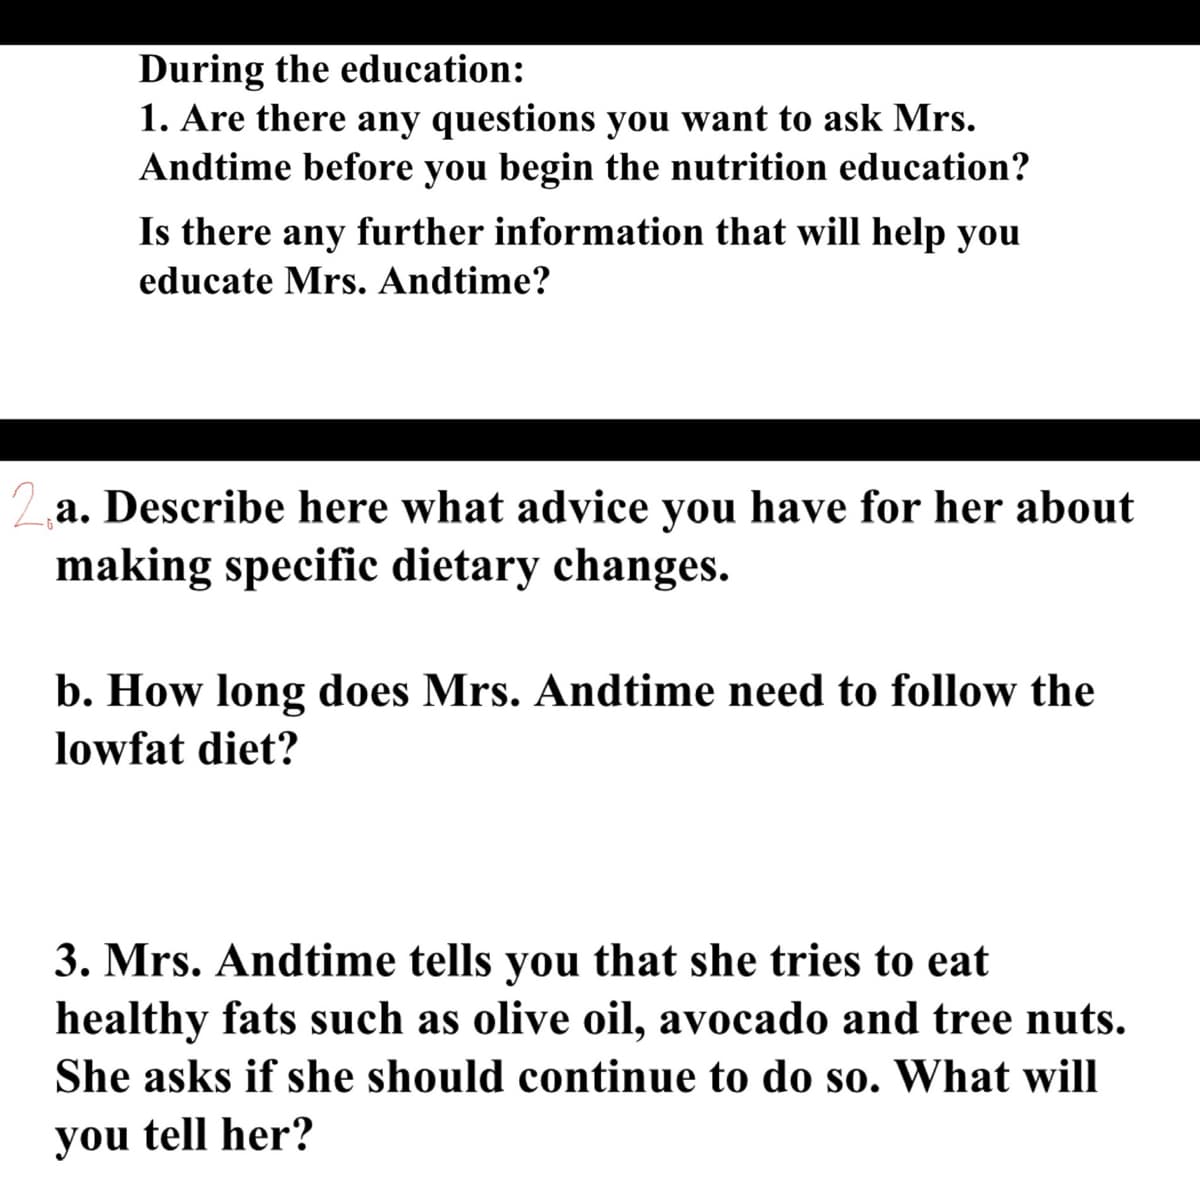 During the education:
1. Are there any questions you want to ask Mrs.
Andtime before you begin the nutrition education?
Is there any further information that will help you
educate Mrs. Andtime?
2a. Describe here what advice you have for her about
making specific dietary changes.
b. How long does Mrs. Andtime need to follow the
lowfat diet?
3. Mrs. Andtime tells you that she tries to eat
healthy fats such as olive oil, avocado and tree nuts.
She asks if she should continue to do so. What will
you tell her?